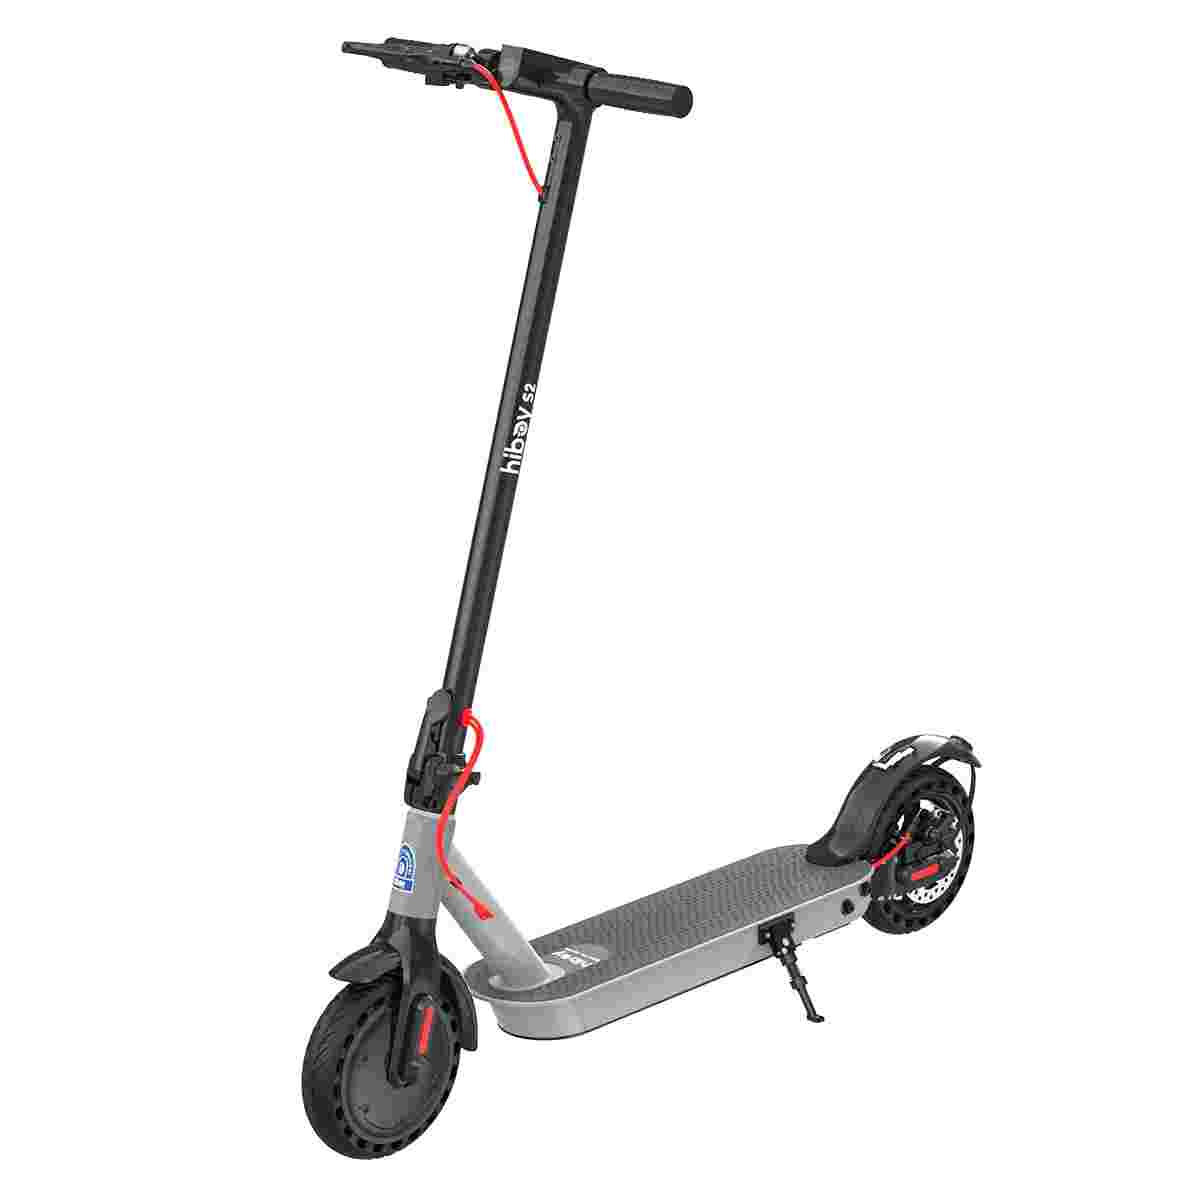 Hiboy S2: Best budget electric scooter for heavy adults